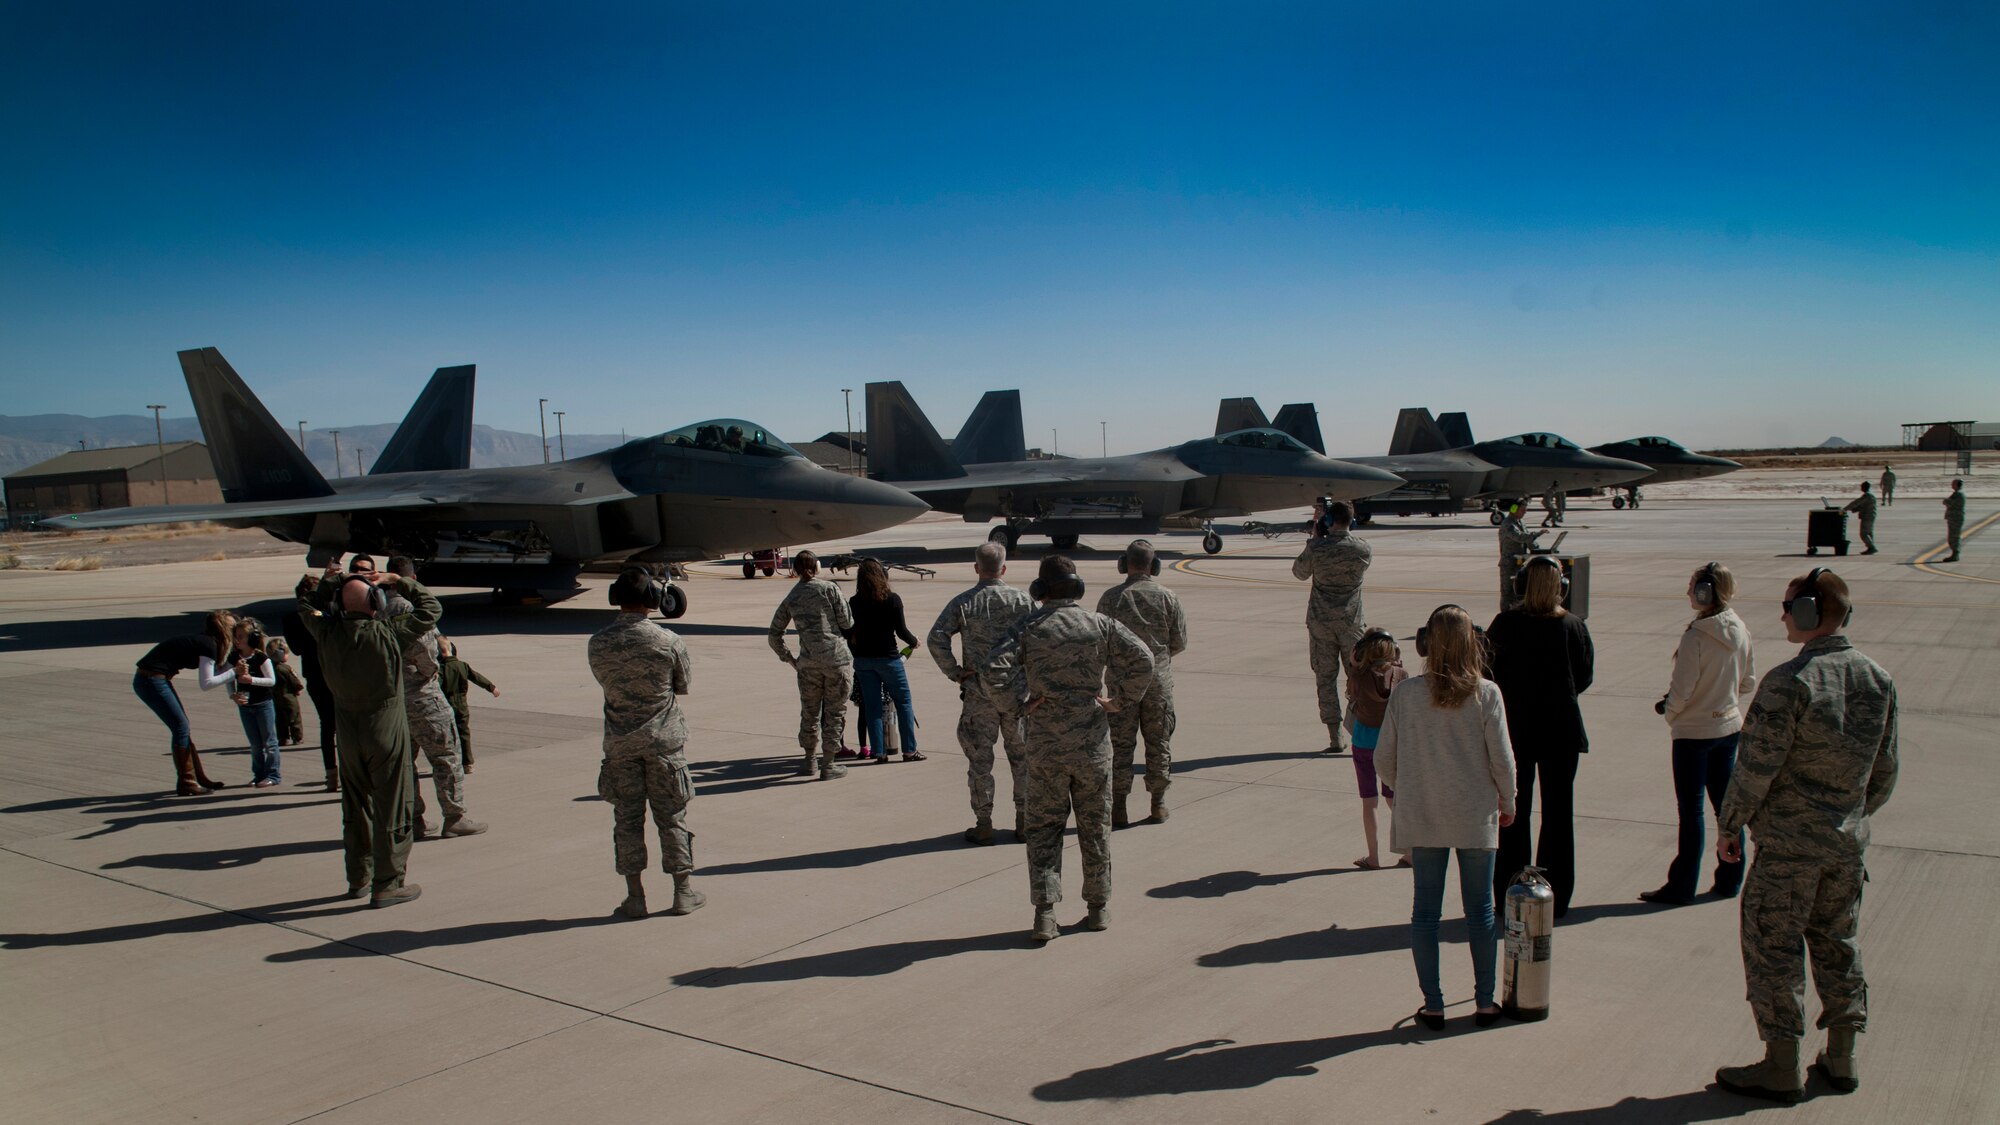 Four F-22 Raptors park after flying their final four-ship tactical sortie at Holloman Air Force Base, N.M., Feb. 20. The 7th Fighter Squadron and members of the Holloman community celebrated this sortie before the F-22s depart for Tyndall Air Force Base, Fla., in early April. (U.S. Air Force photo by Airman 1st Class Aaron Montoya / Released)